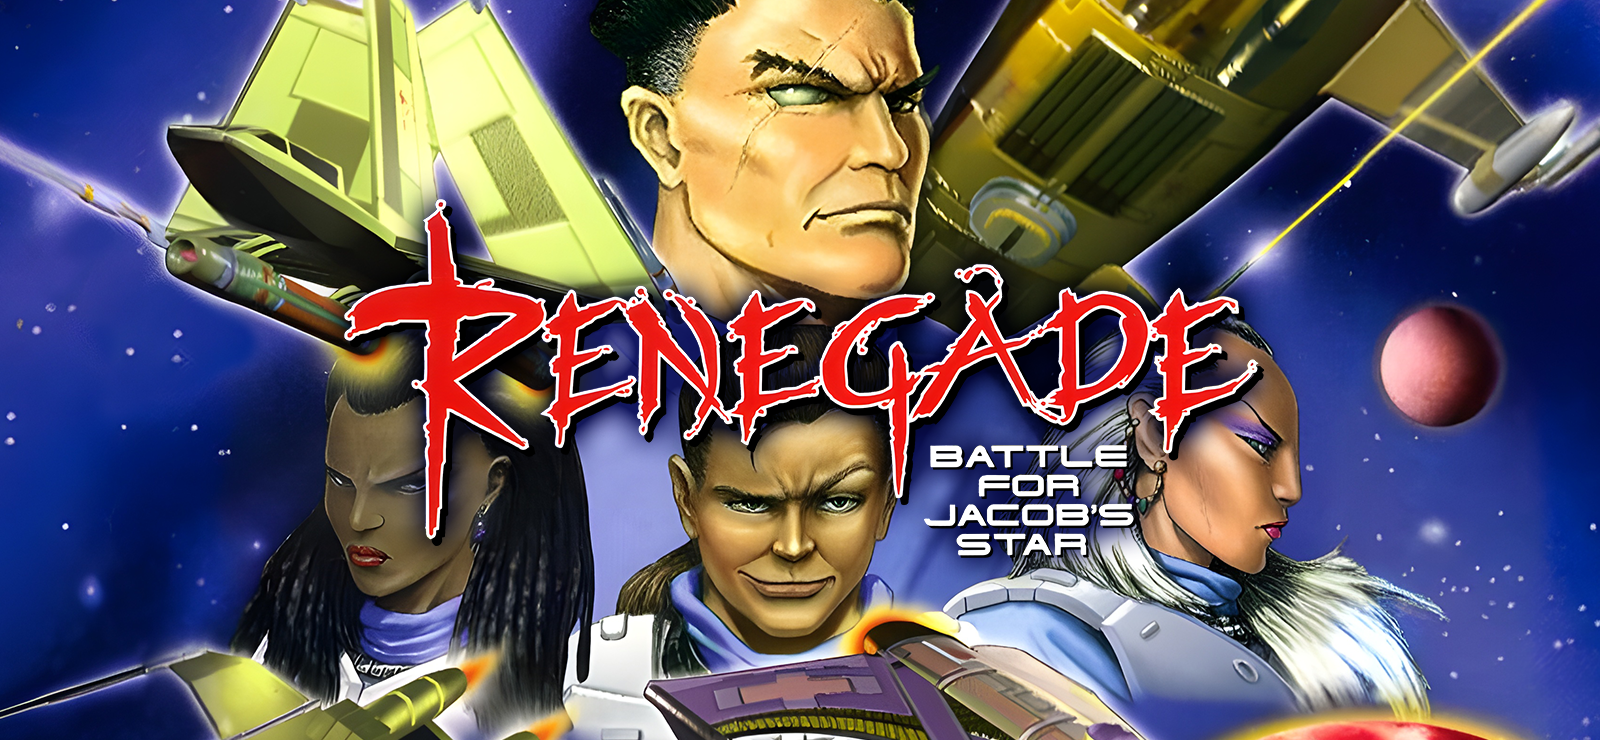 Renegade: The Battle For Jacob's Star